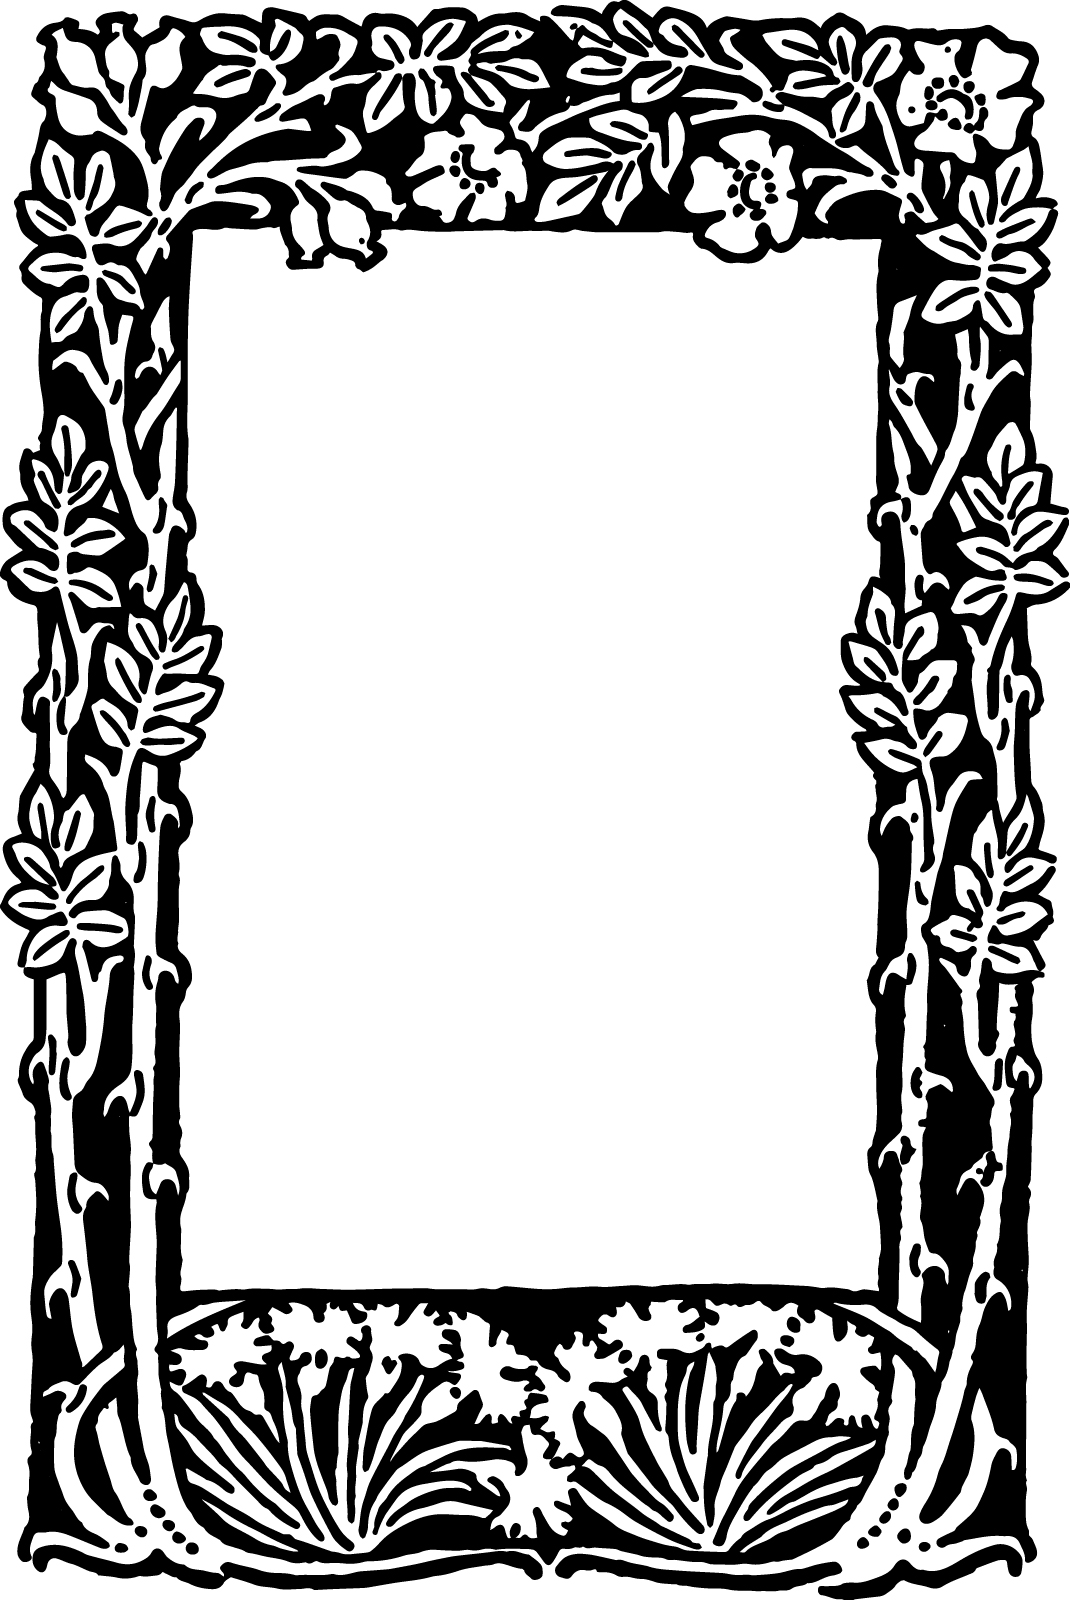 Free Vector   Floral Border Frame | Oh So Nifty Vintage Graphics ...